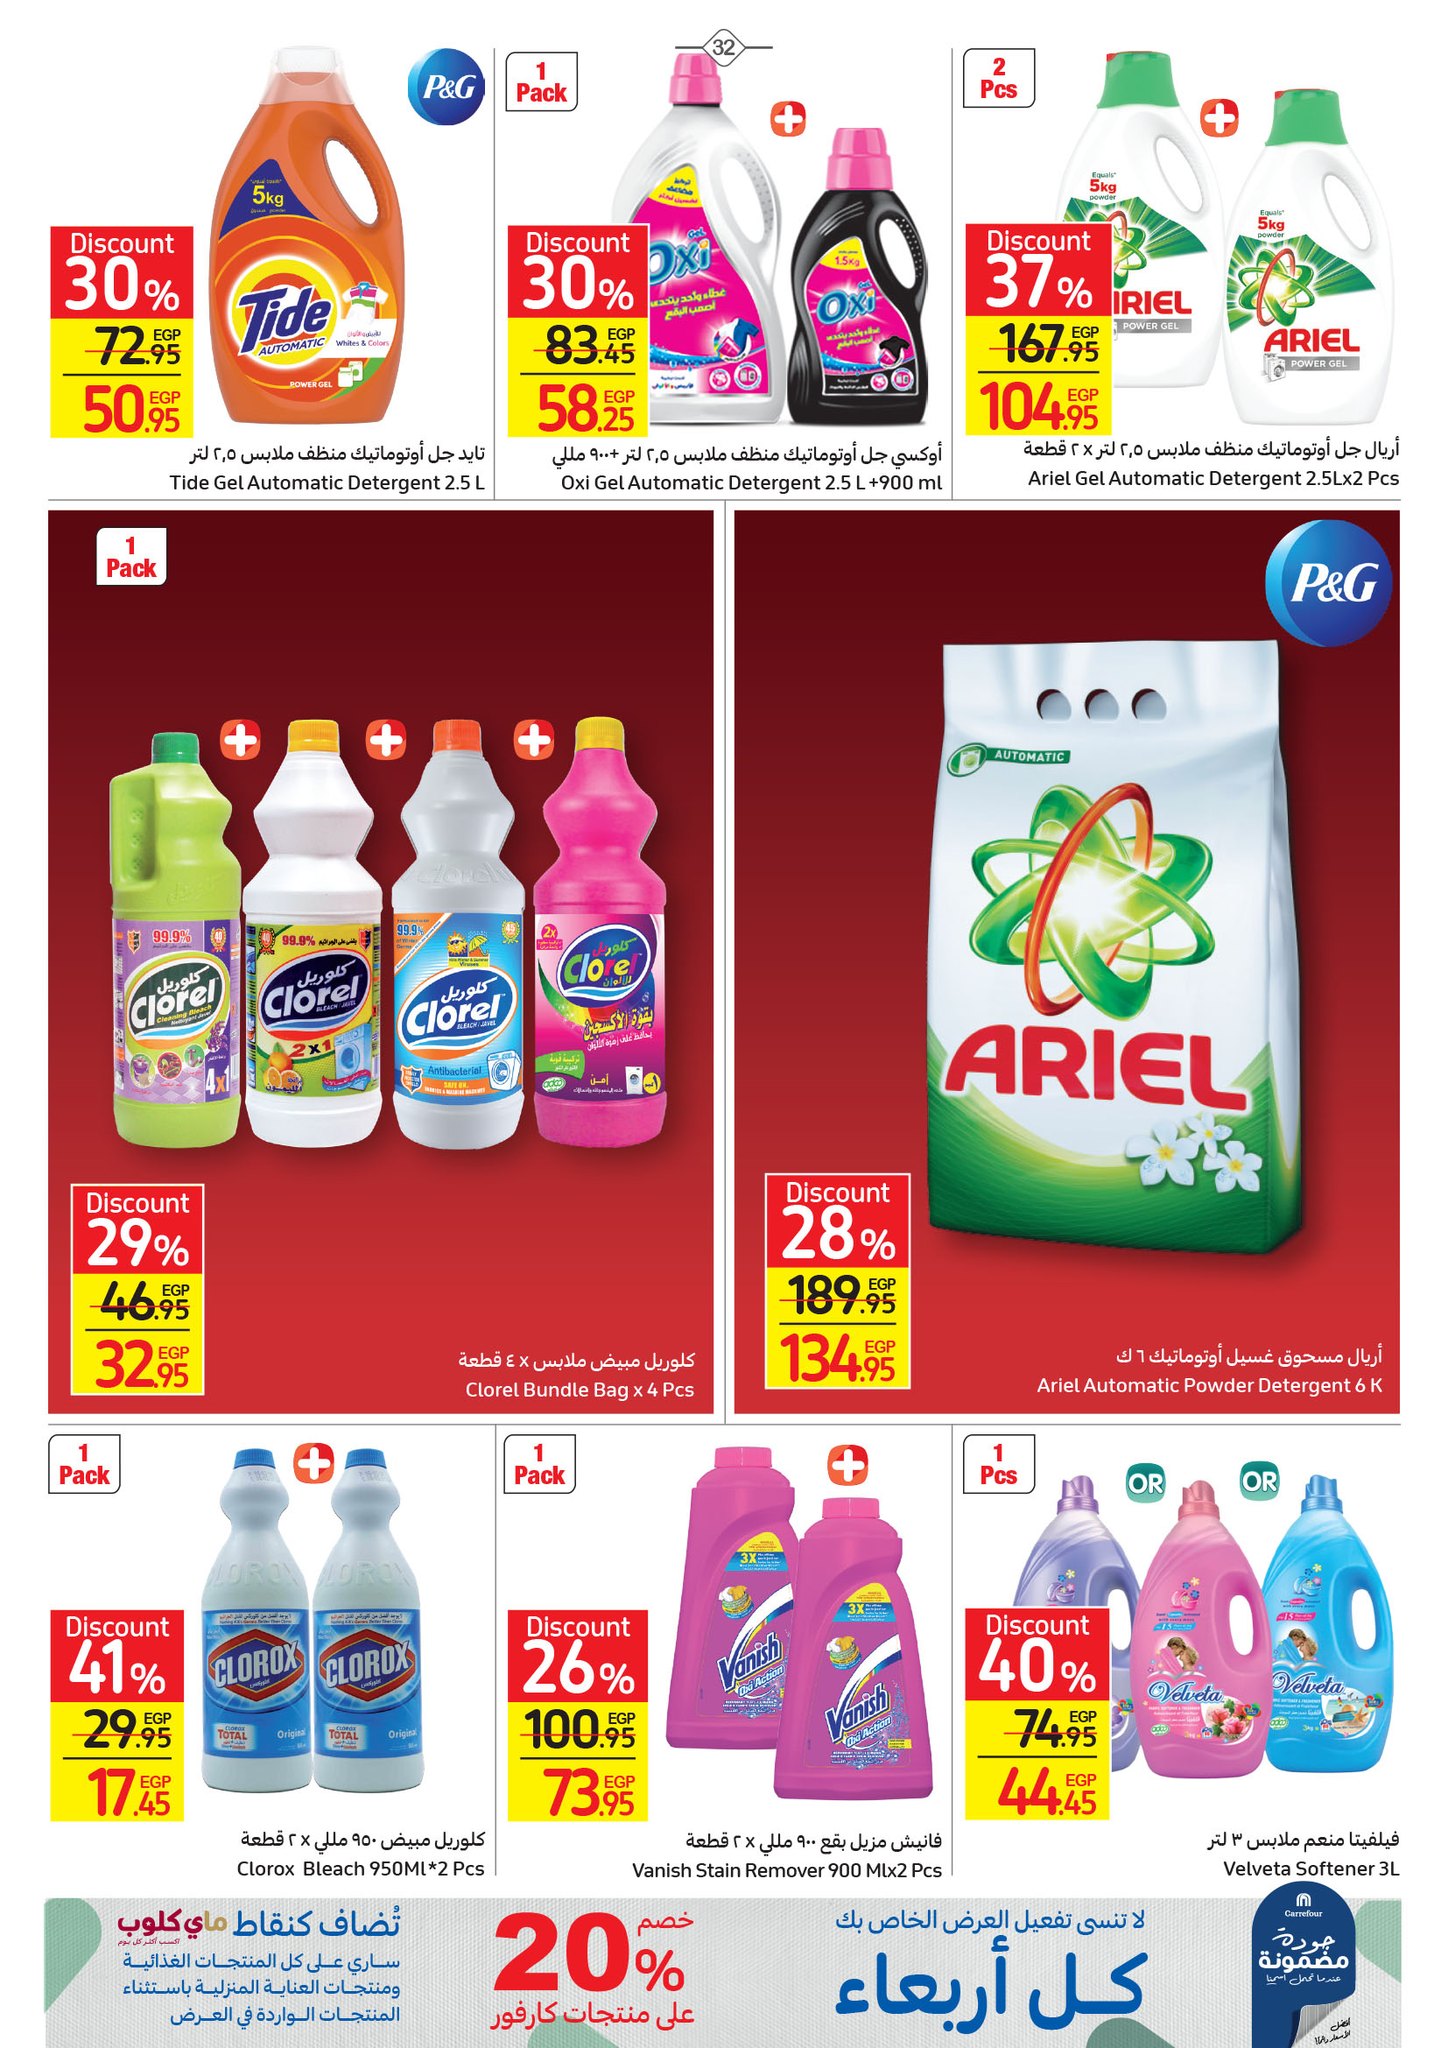 Watch the latest Carrefour half price offers "Last Chance Offer" until December 4th 32